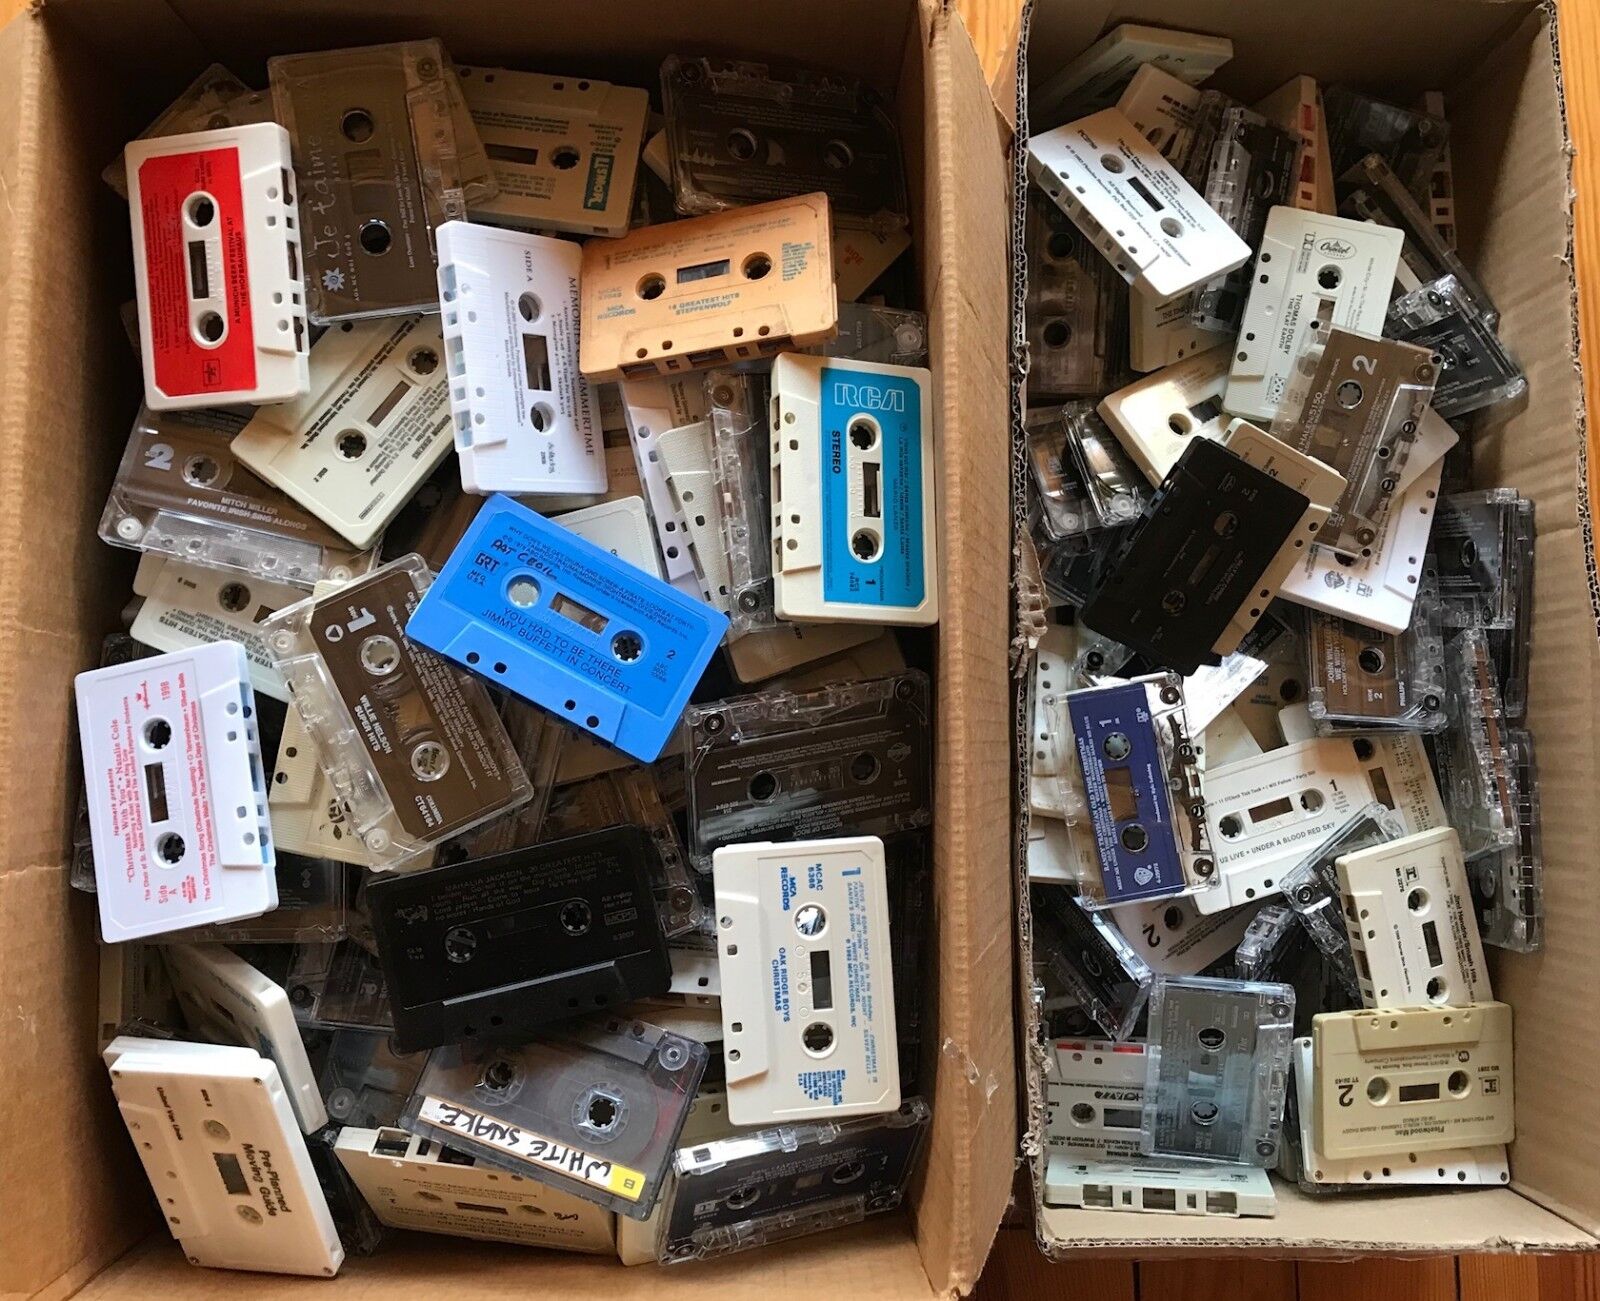 Lot of 100 USED Cassette Tapes for Crafts, Art, Decoration / Blank, Pre-recorded Без бренда